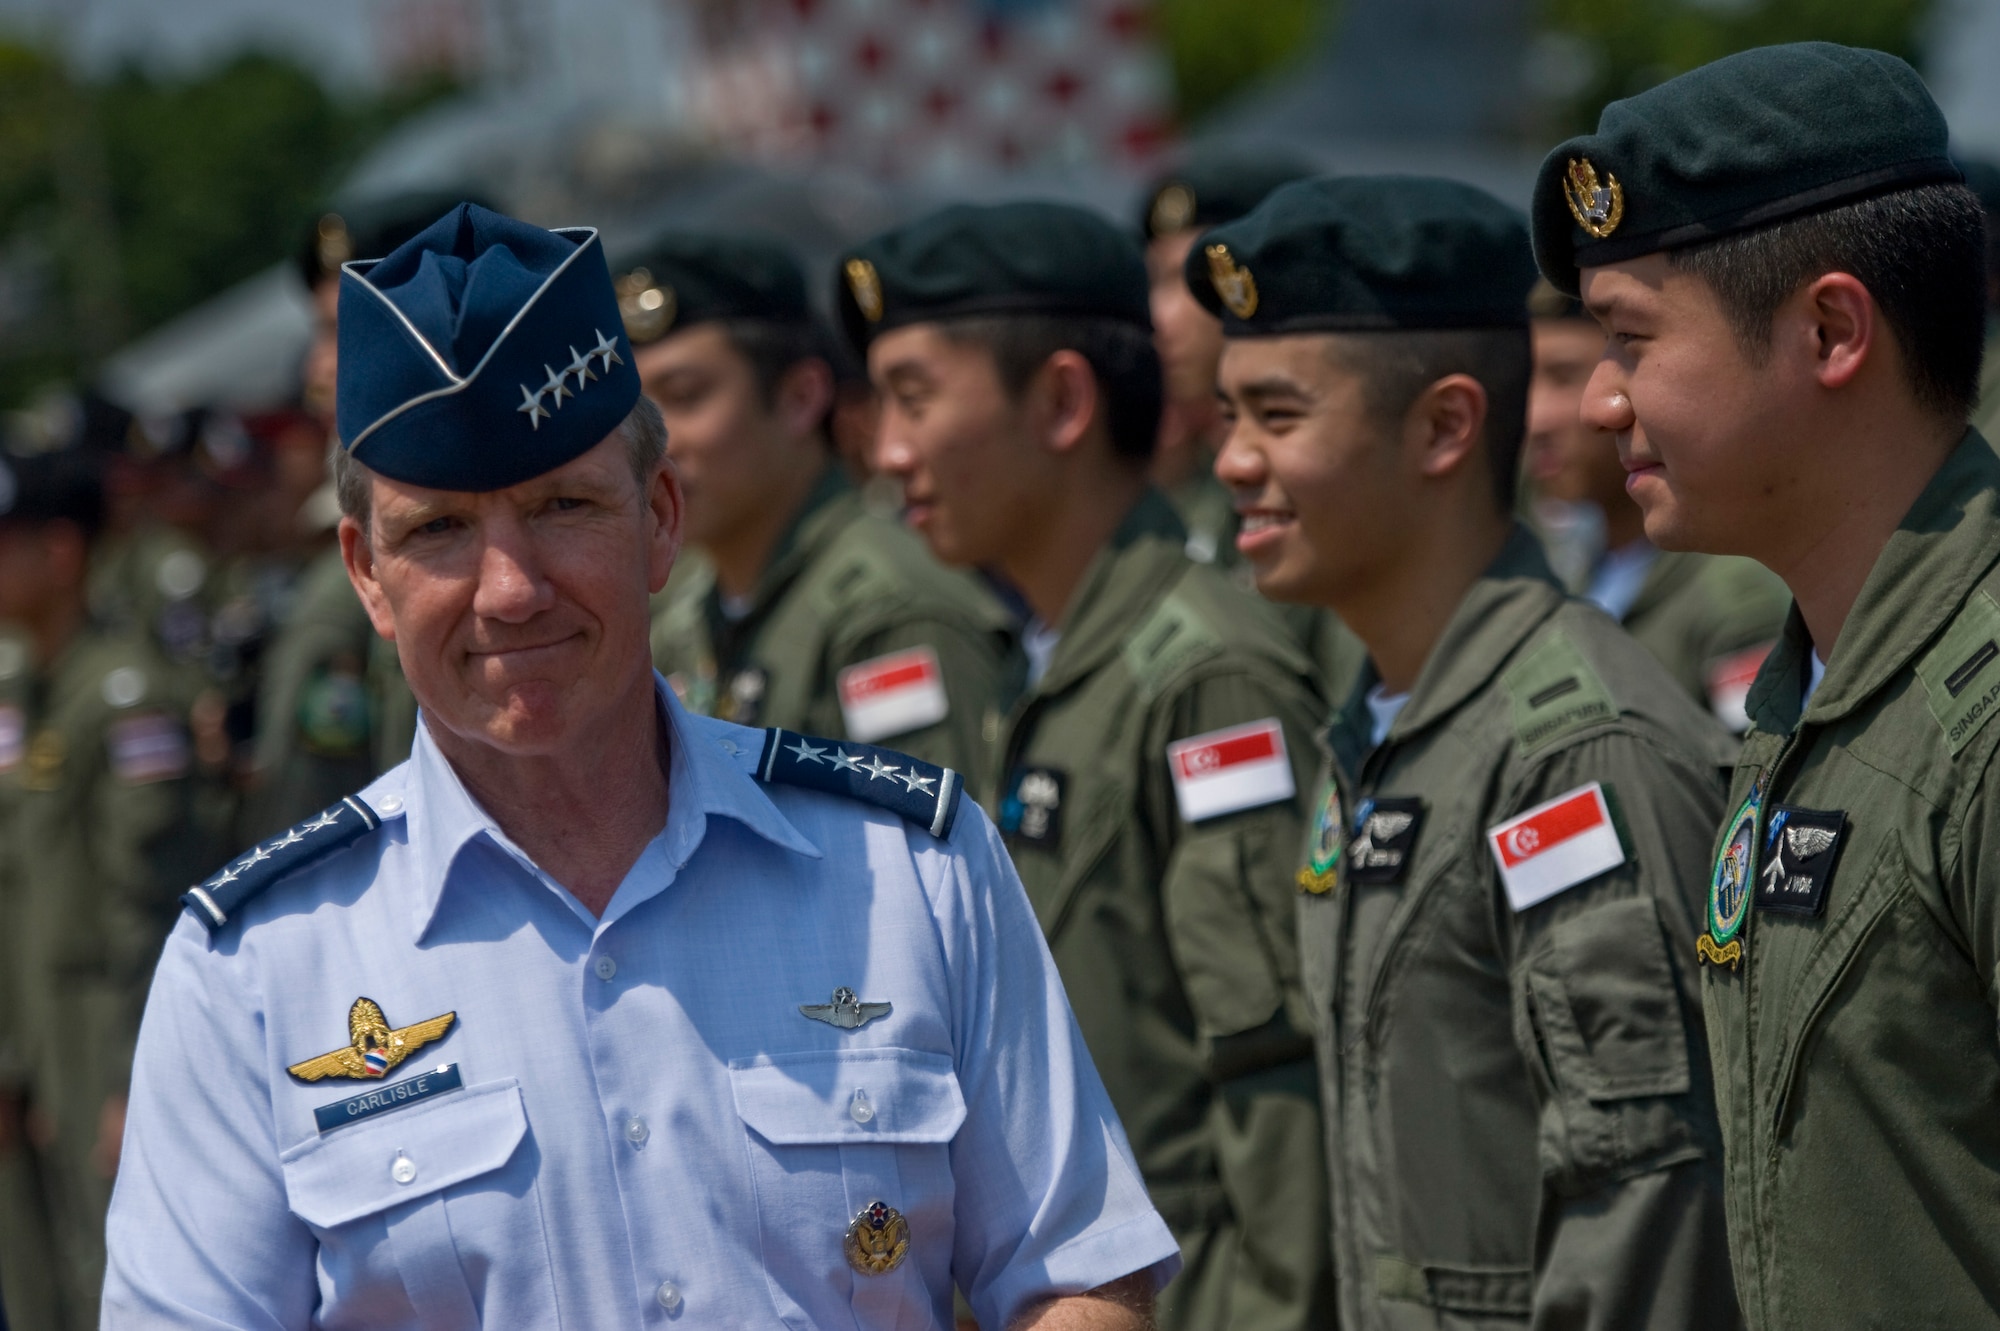 U.S. Air Force Gen. Hawk Carlisle, commander of Pacific Air Forces, departs the closing ceremony for Cope Tiger 13 at Korat Royal Thai Air Force Base, Thailand, March 22, 2013. More than 300 U.S. service members are participating in CT13, which offers an unparalleled opportunity to conduct a wide spectrum of large force employment air operations and strengthen military-to-military ties with two key partner nations, Thailand and Singapore. (U.S. Air Force photo/2nd Lt. Jake Bailey)